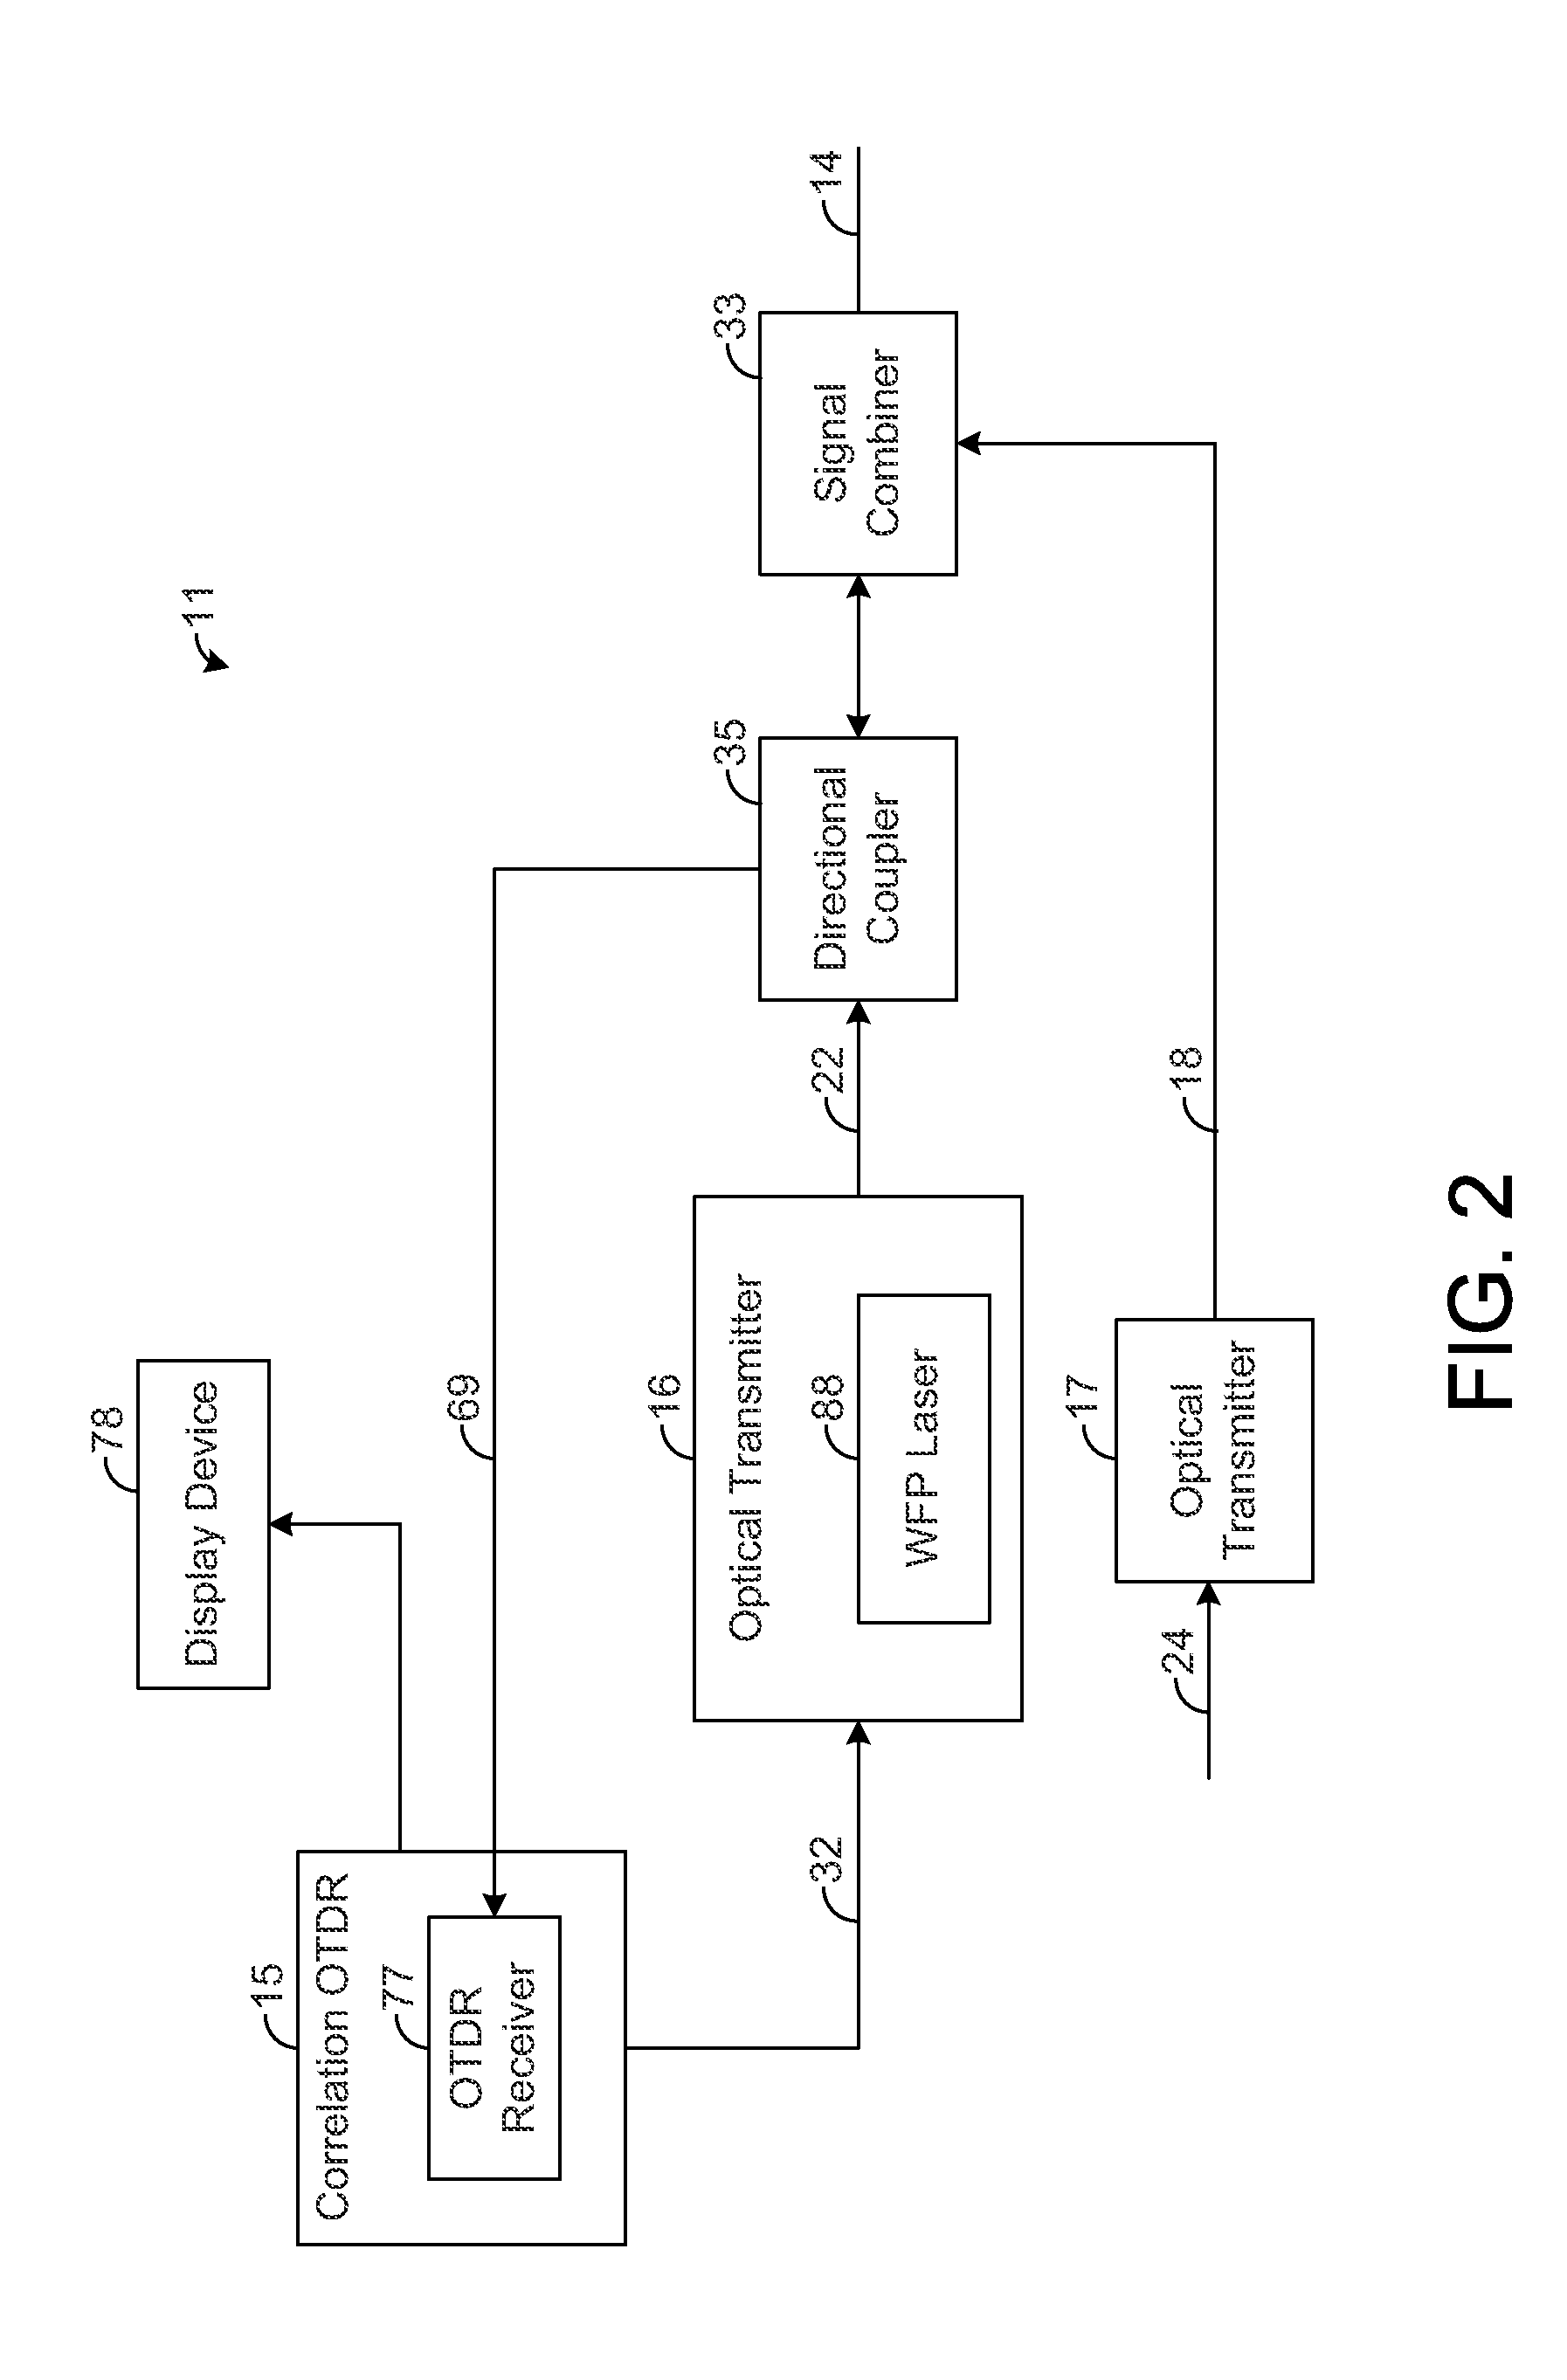 Optical time domain reflectometer systems and methods using wideband optical signals for suppressing beat noise